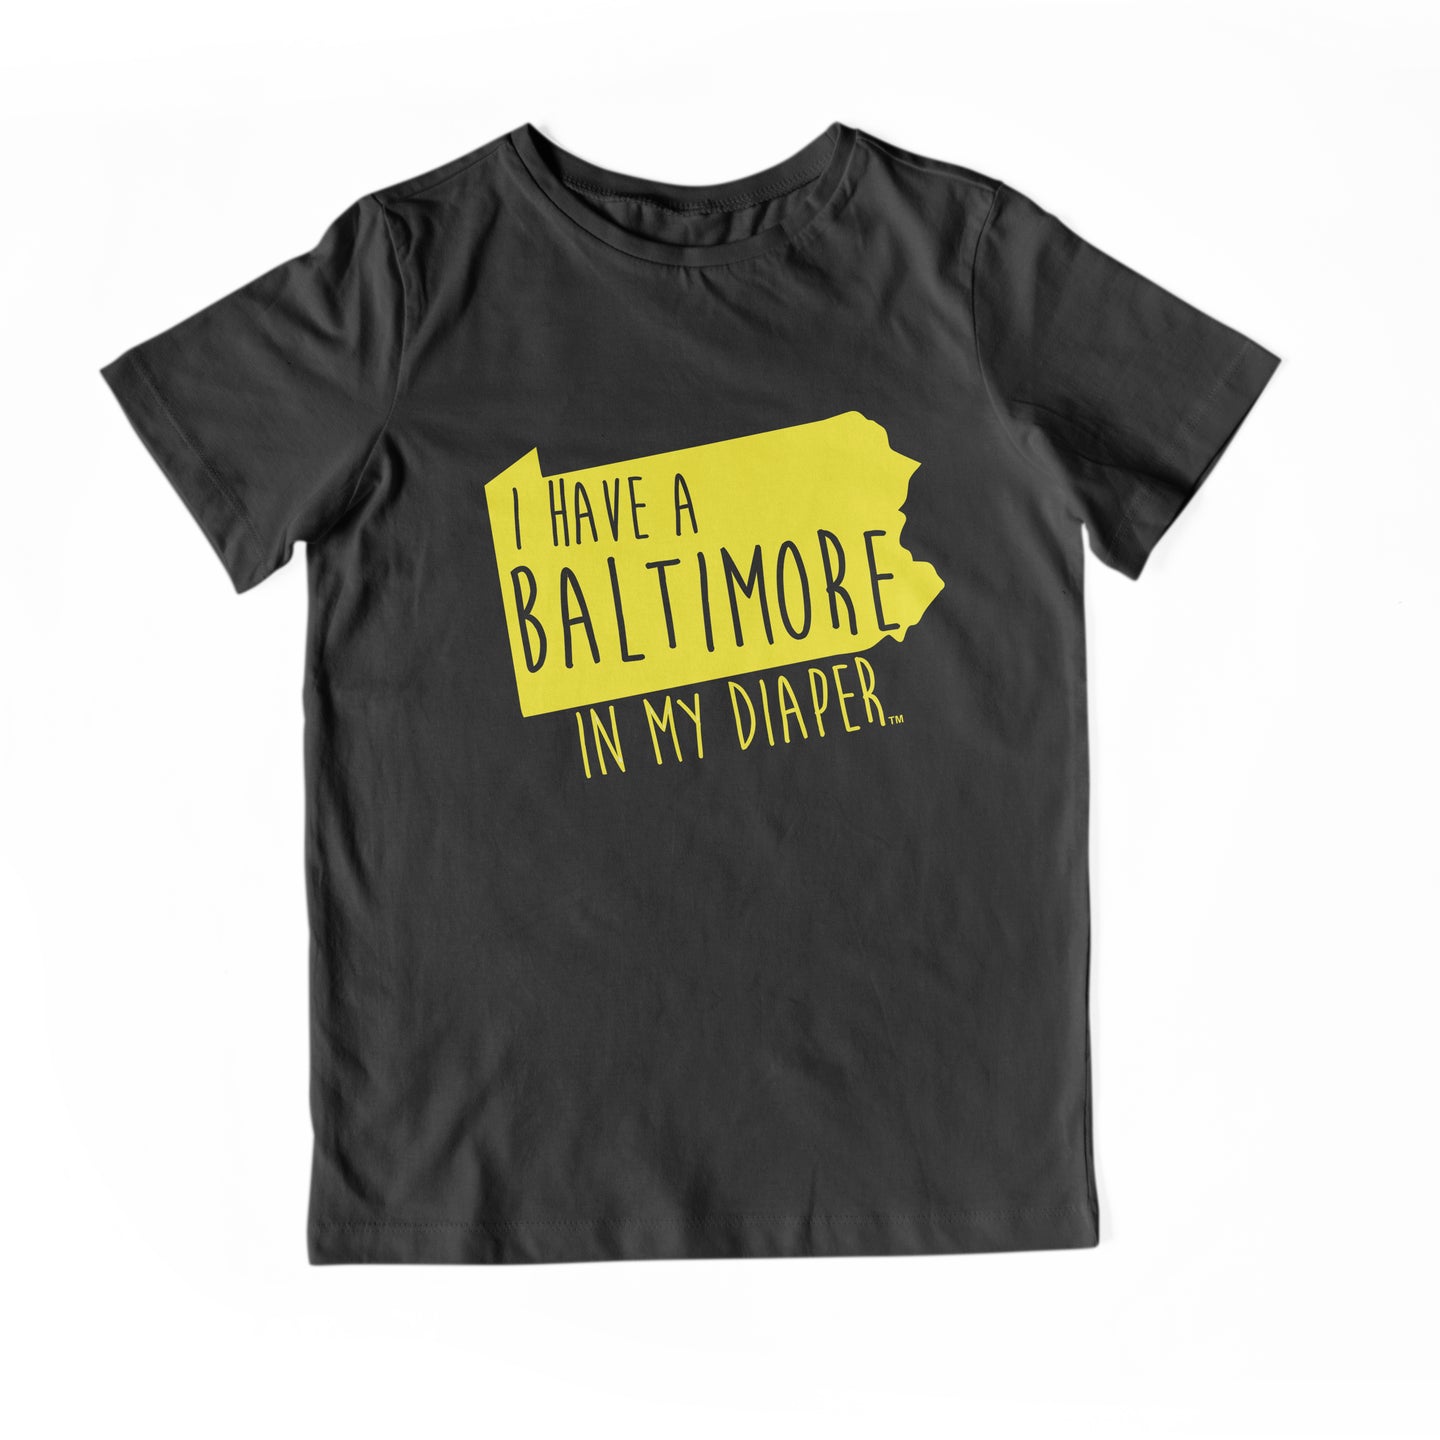 I HAVE A BALTIMORE IN MY DIAPER Child Tee